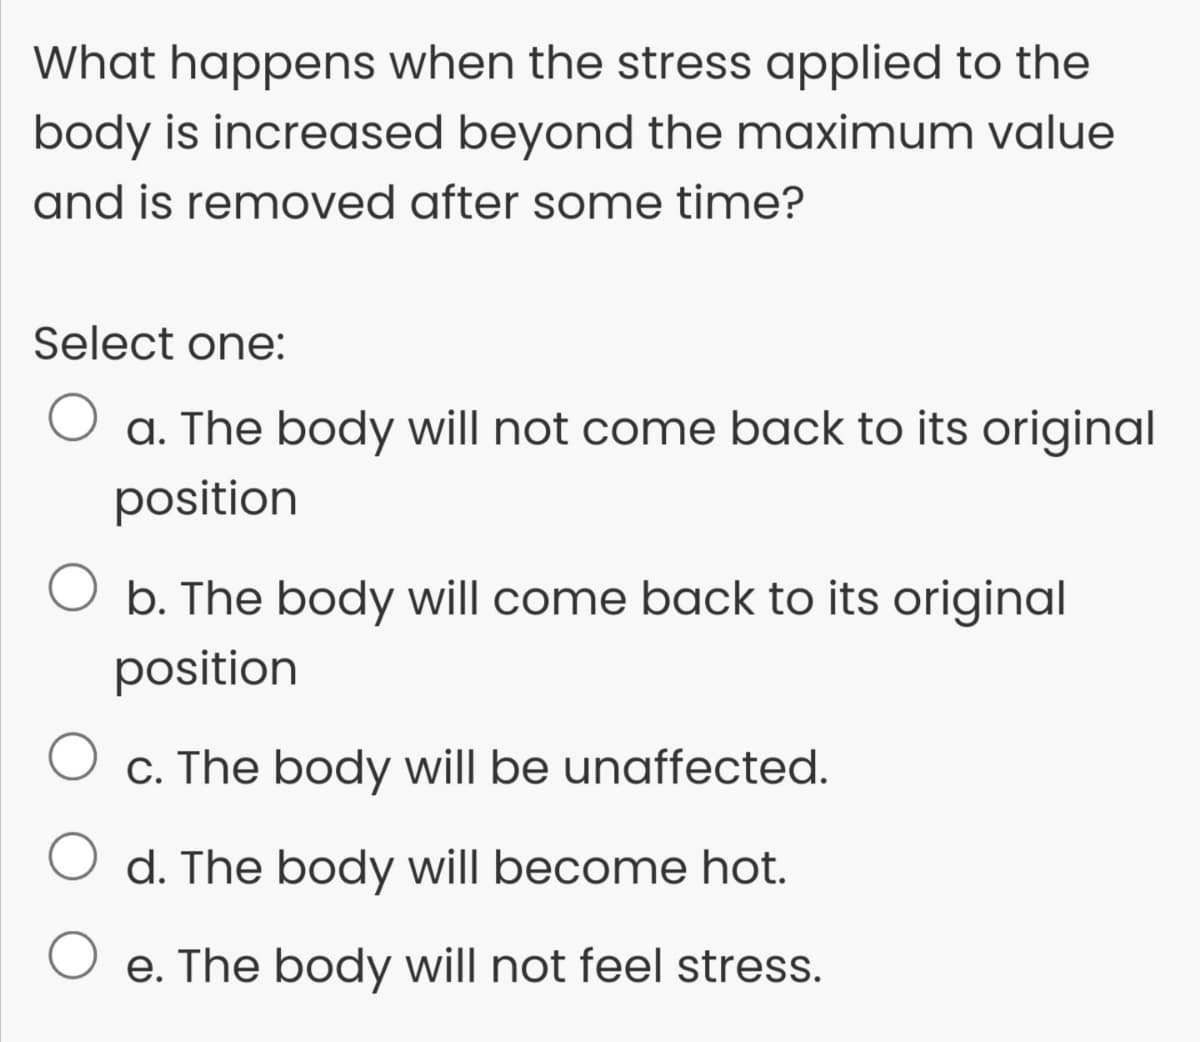 What happens when the stress applied to the
body is increased beyond the maximum value
and is removed after some time?
Select one:
a. The body will not come back to its original
position
O b. The body will come back to its original
position
c. The body will be unaffected.
d. The body will become hot.
e. The body will not feel stress.
